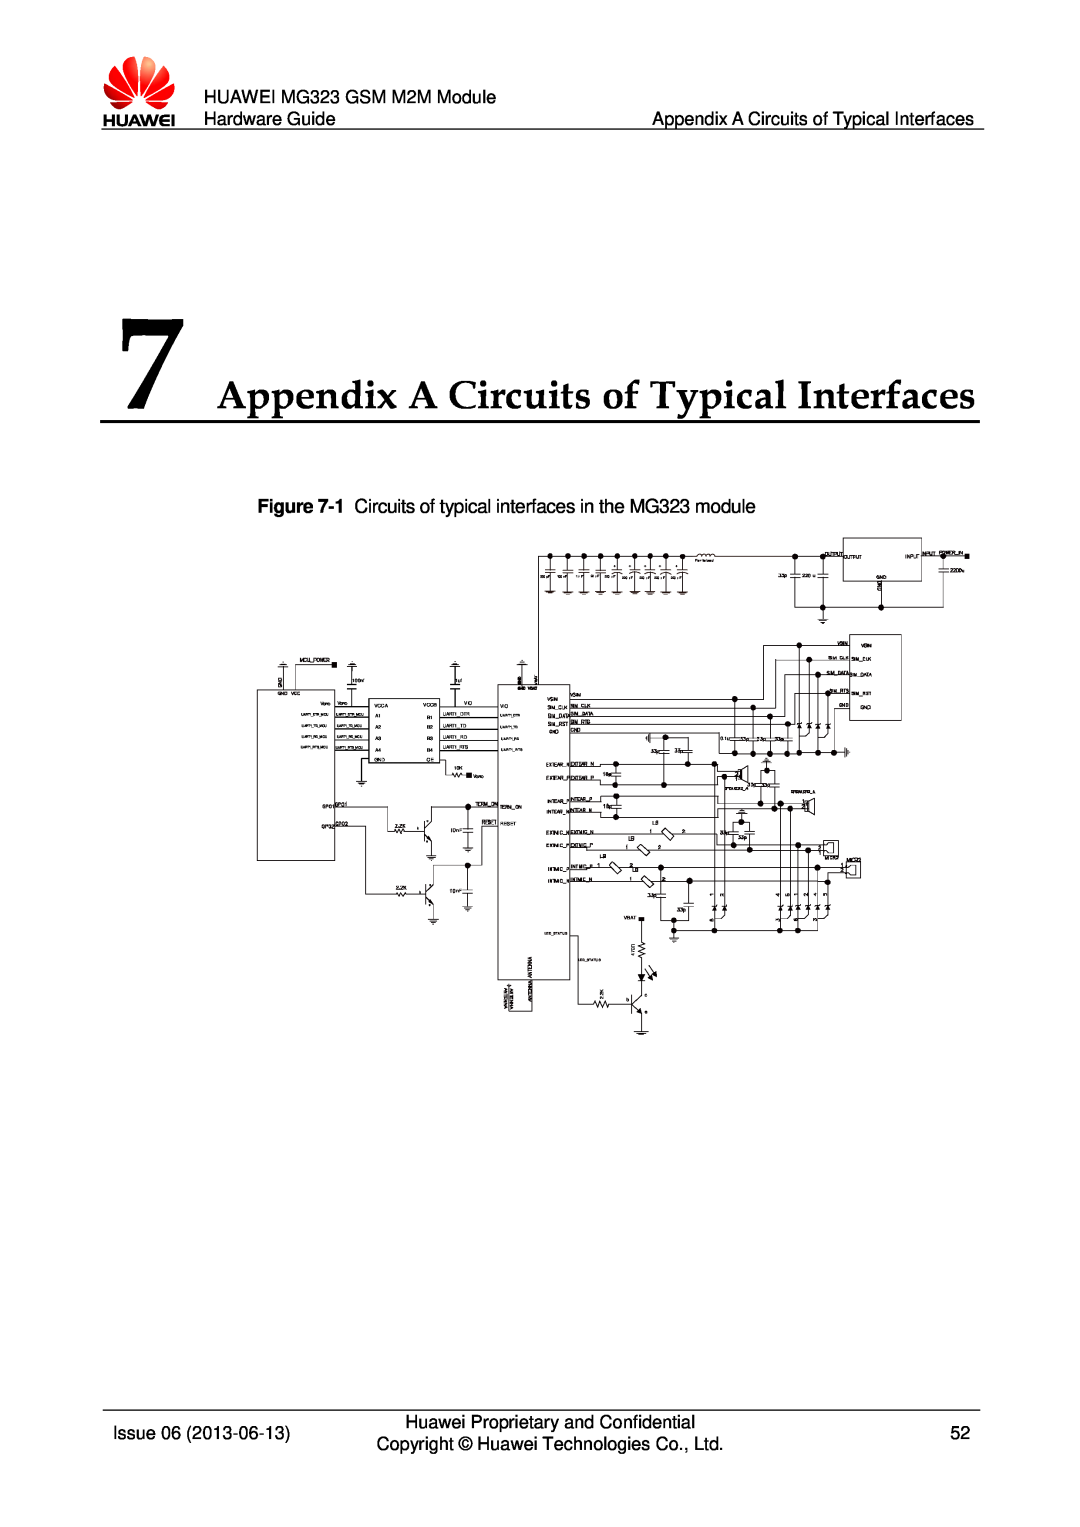 Huawei Appendix A Circuits of Typical Interfaces, HUAWEI MG323 GSM M2M Module, Hardware Guide, Issue 06, 0.1u, Reset 